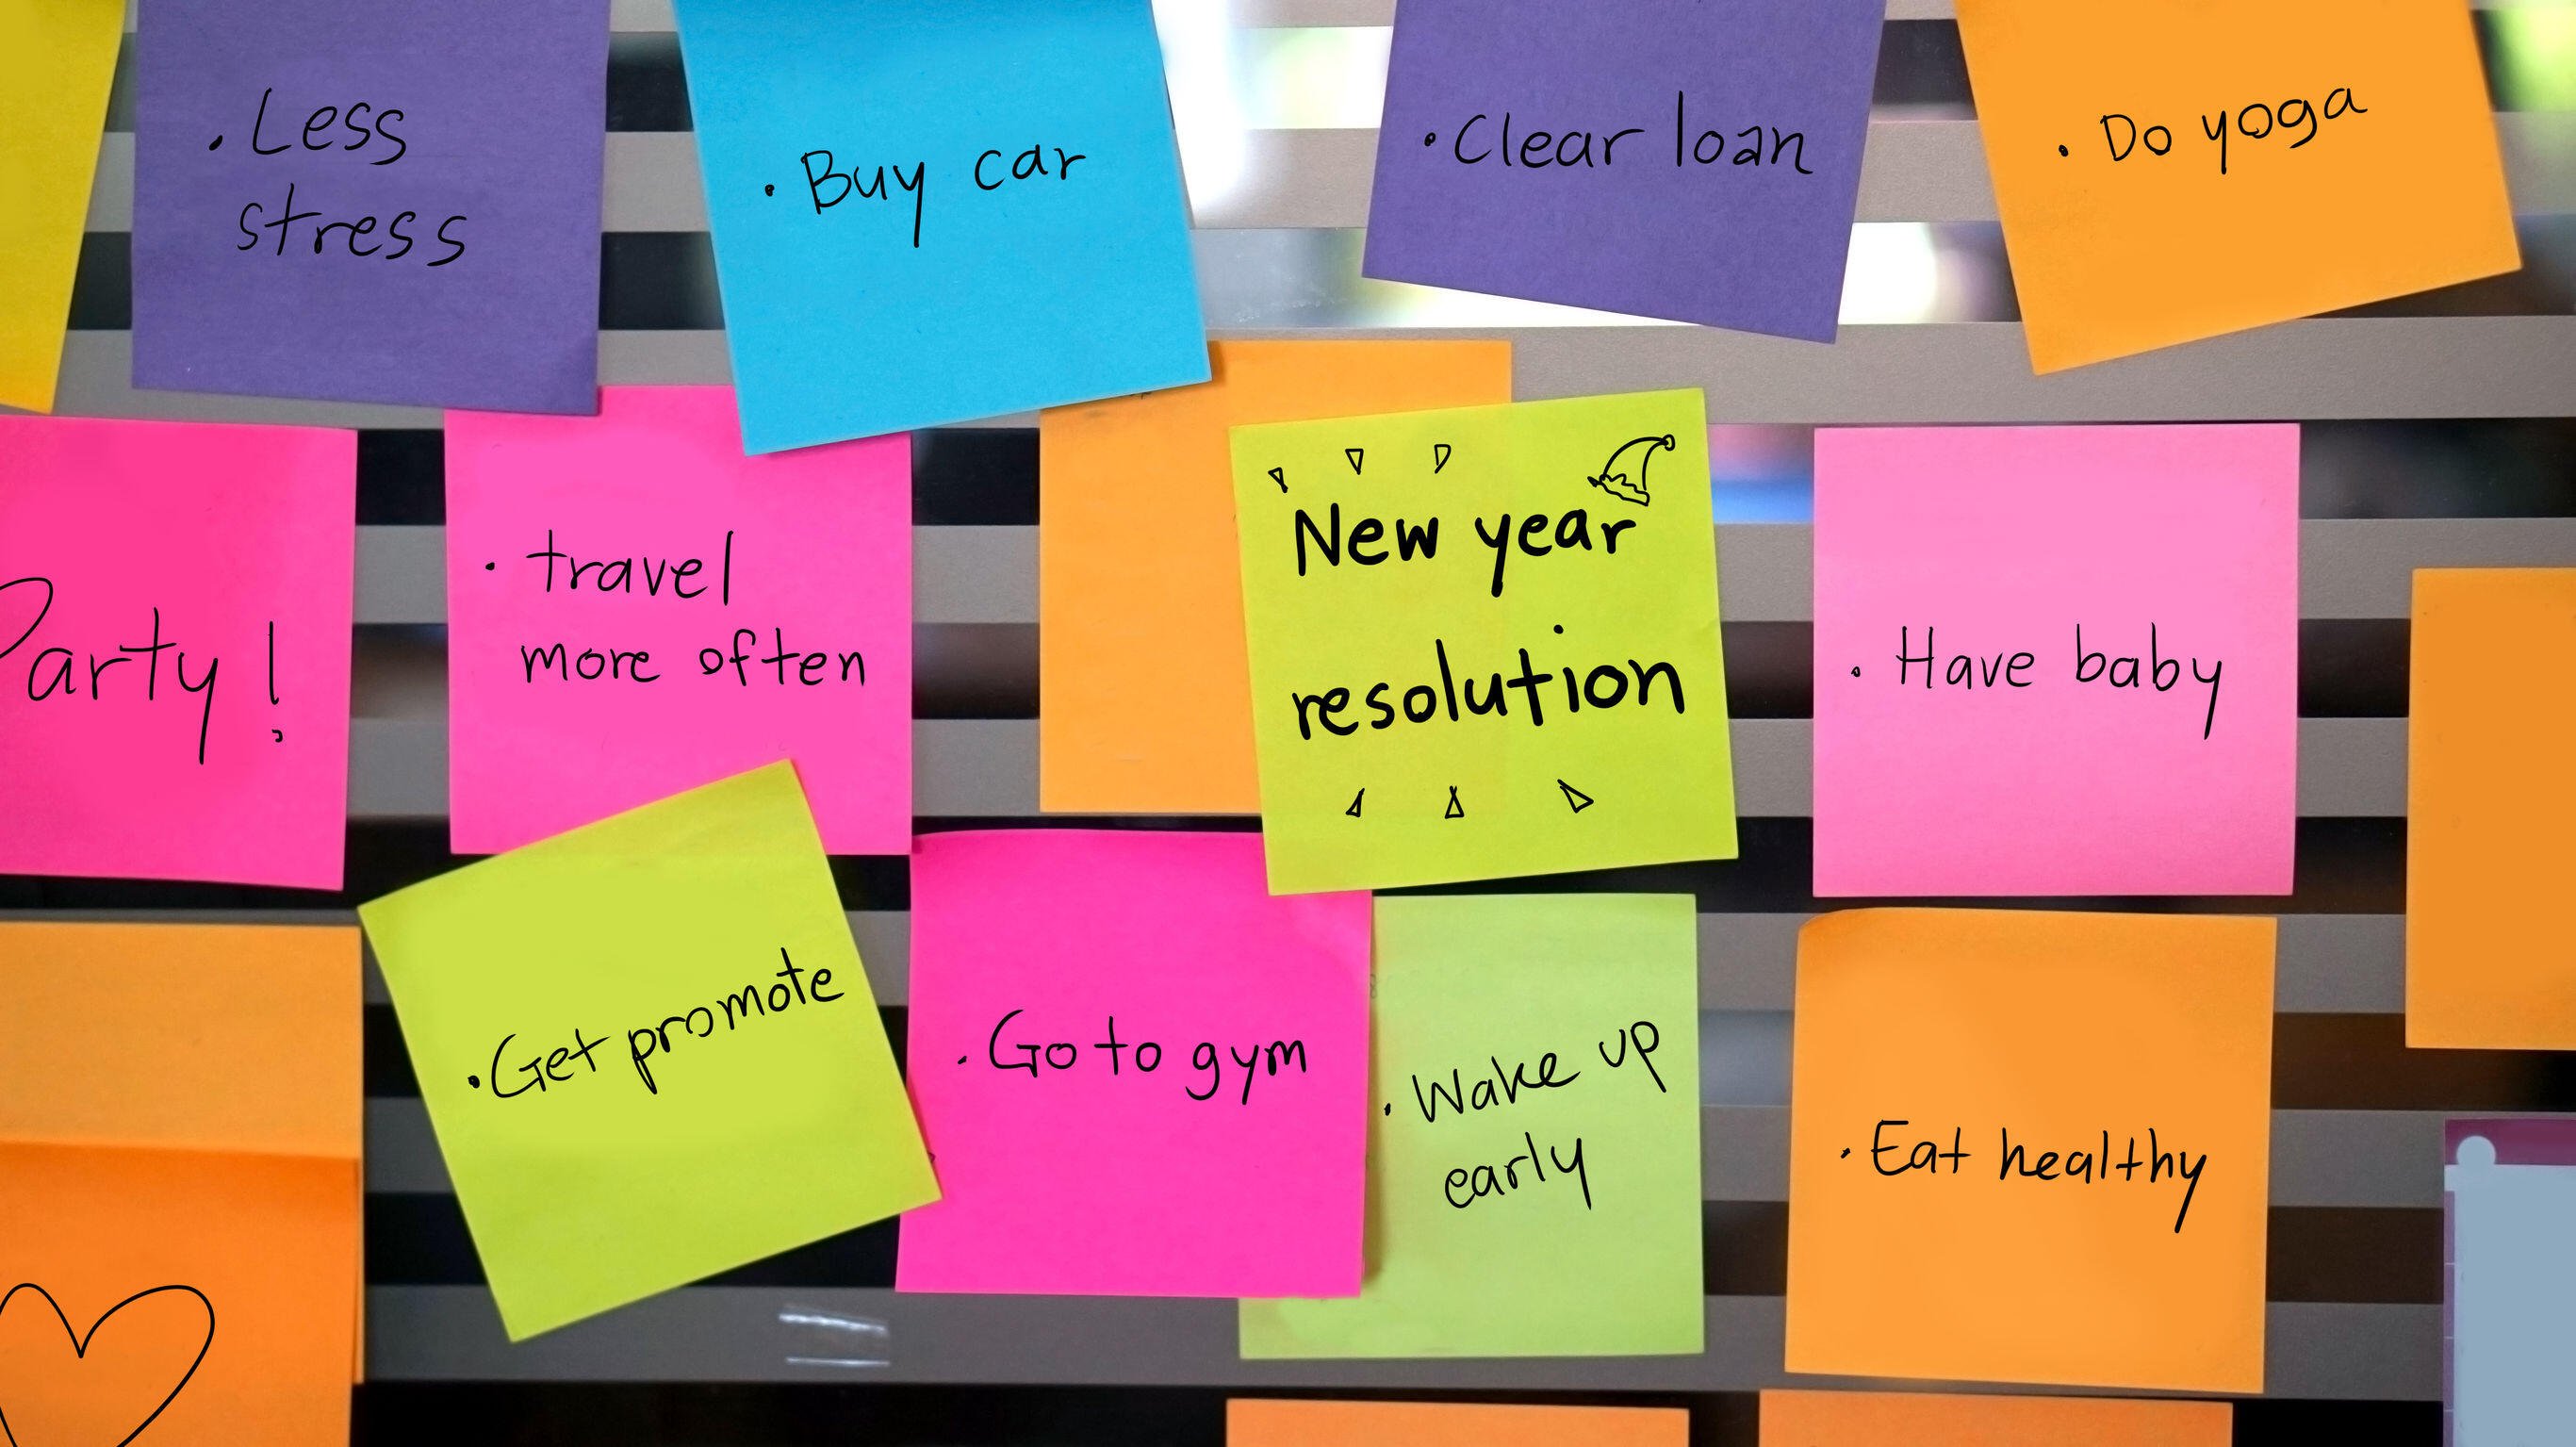 Product of the year. New year Resolutions. New year Resolutions примеры. New year's Resolutions оформление. Надпись New year's Resolutions.